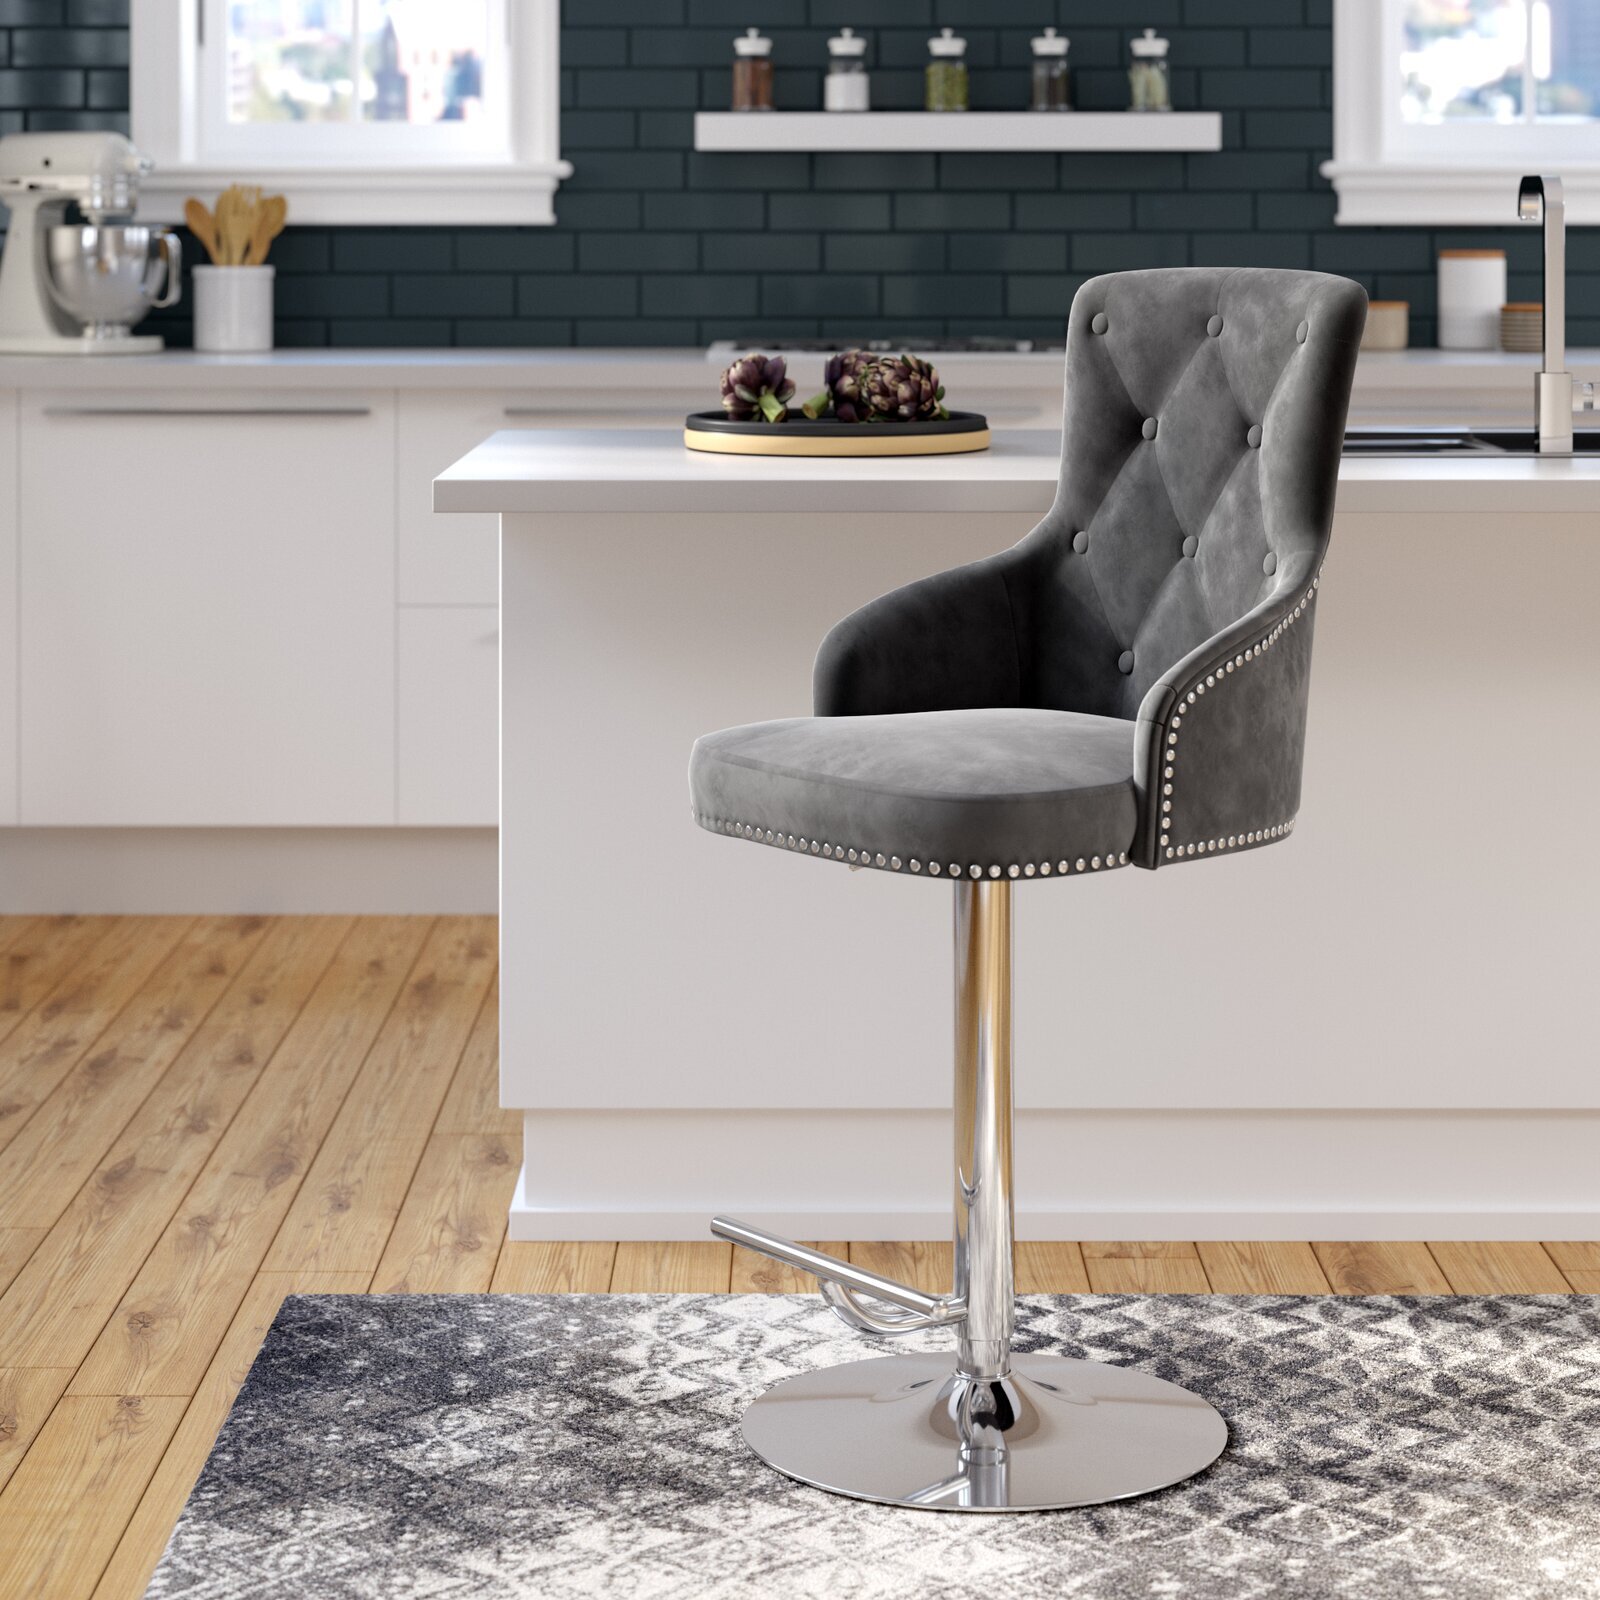 Luxury Bar Stools With Backs and Foot Pedestals